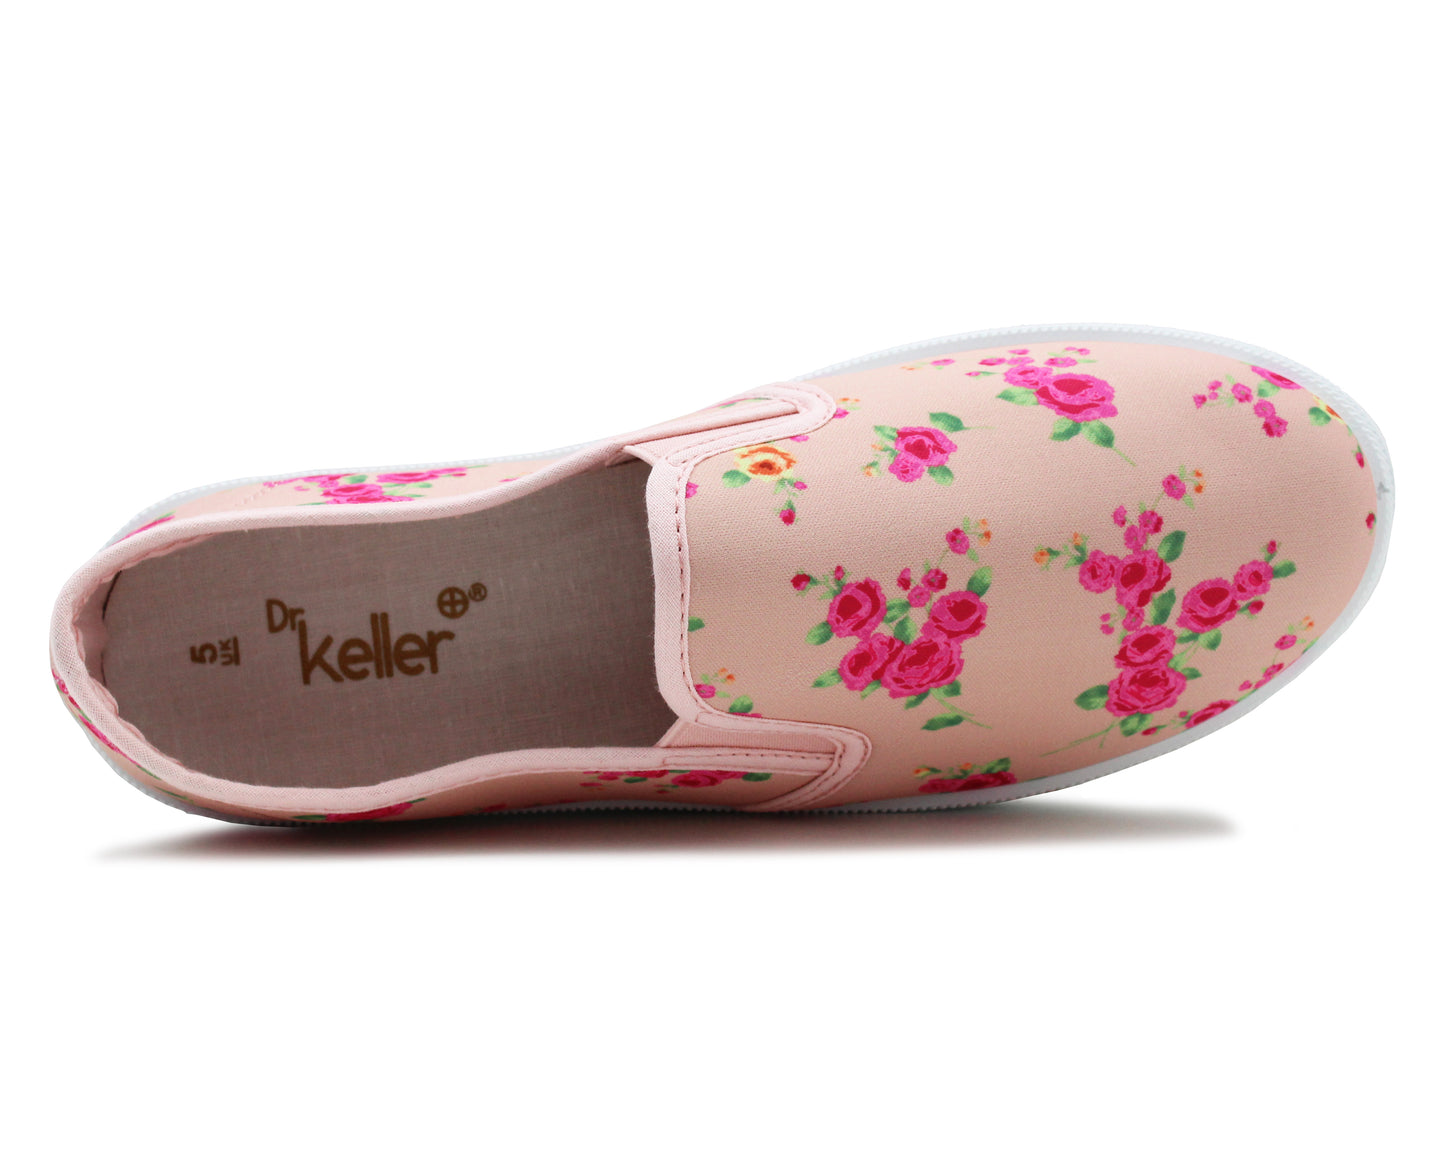 Womens Pink Floral Canvas Slip On Plimsolls Flat Pumps Casual Loafer Trainers